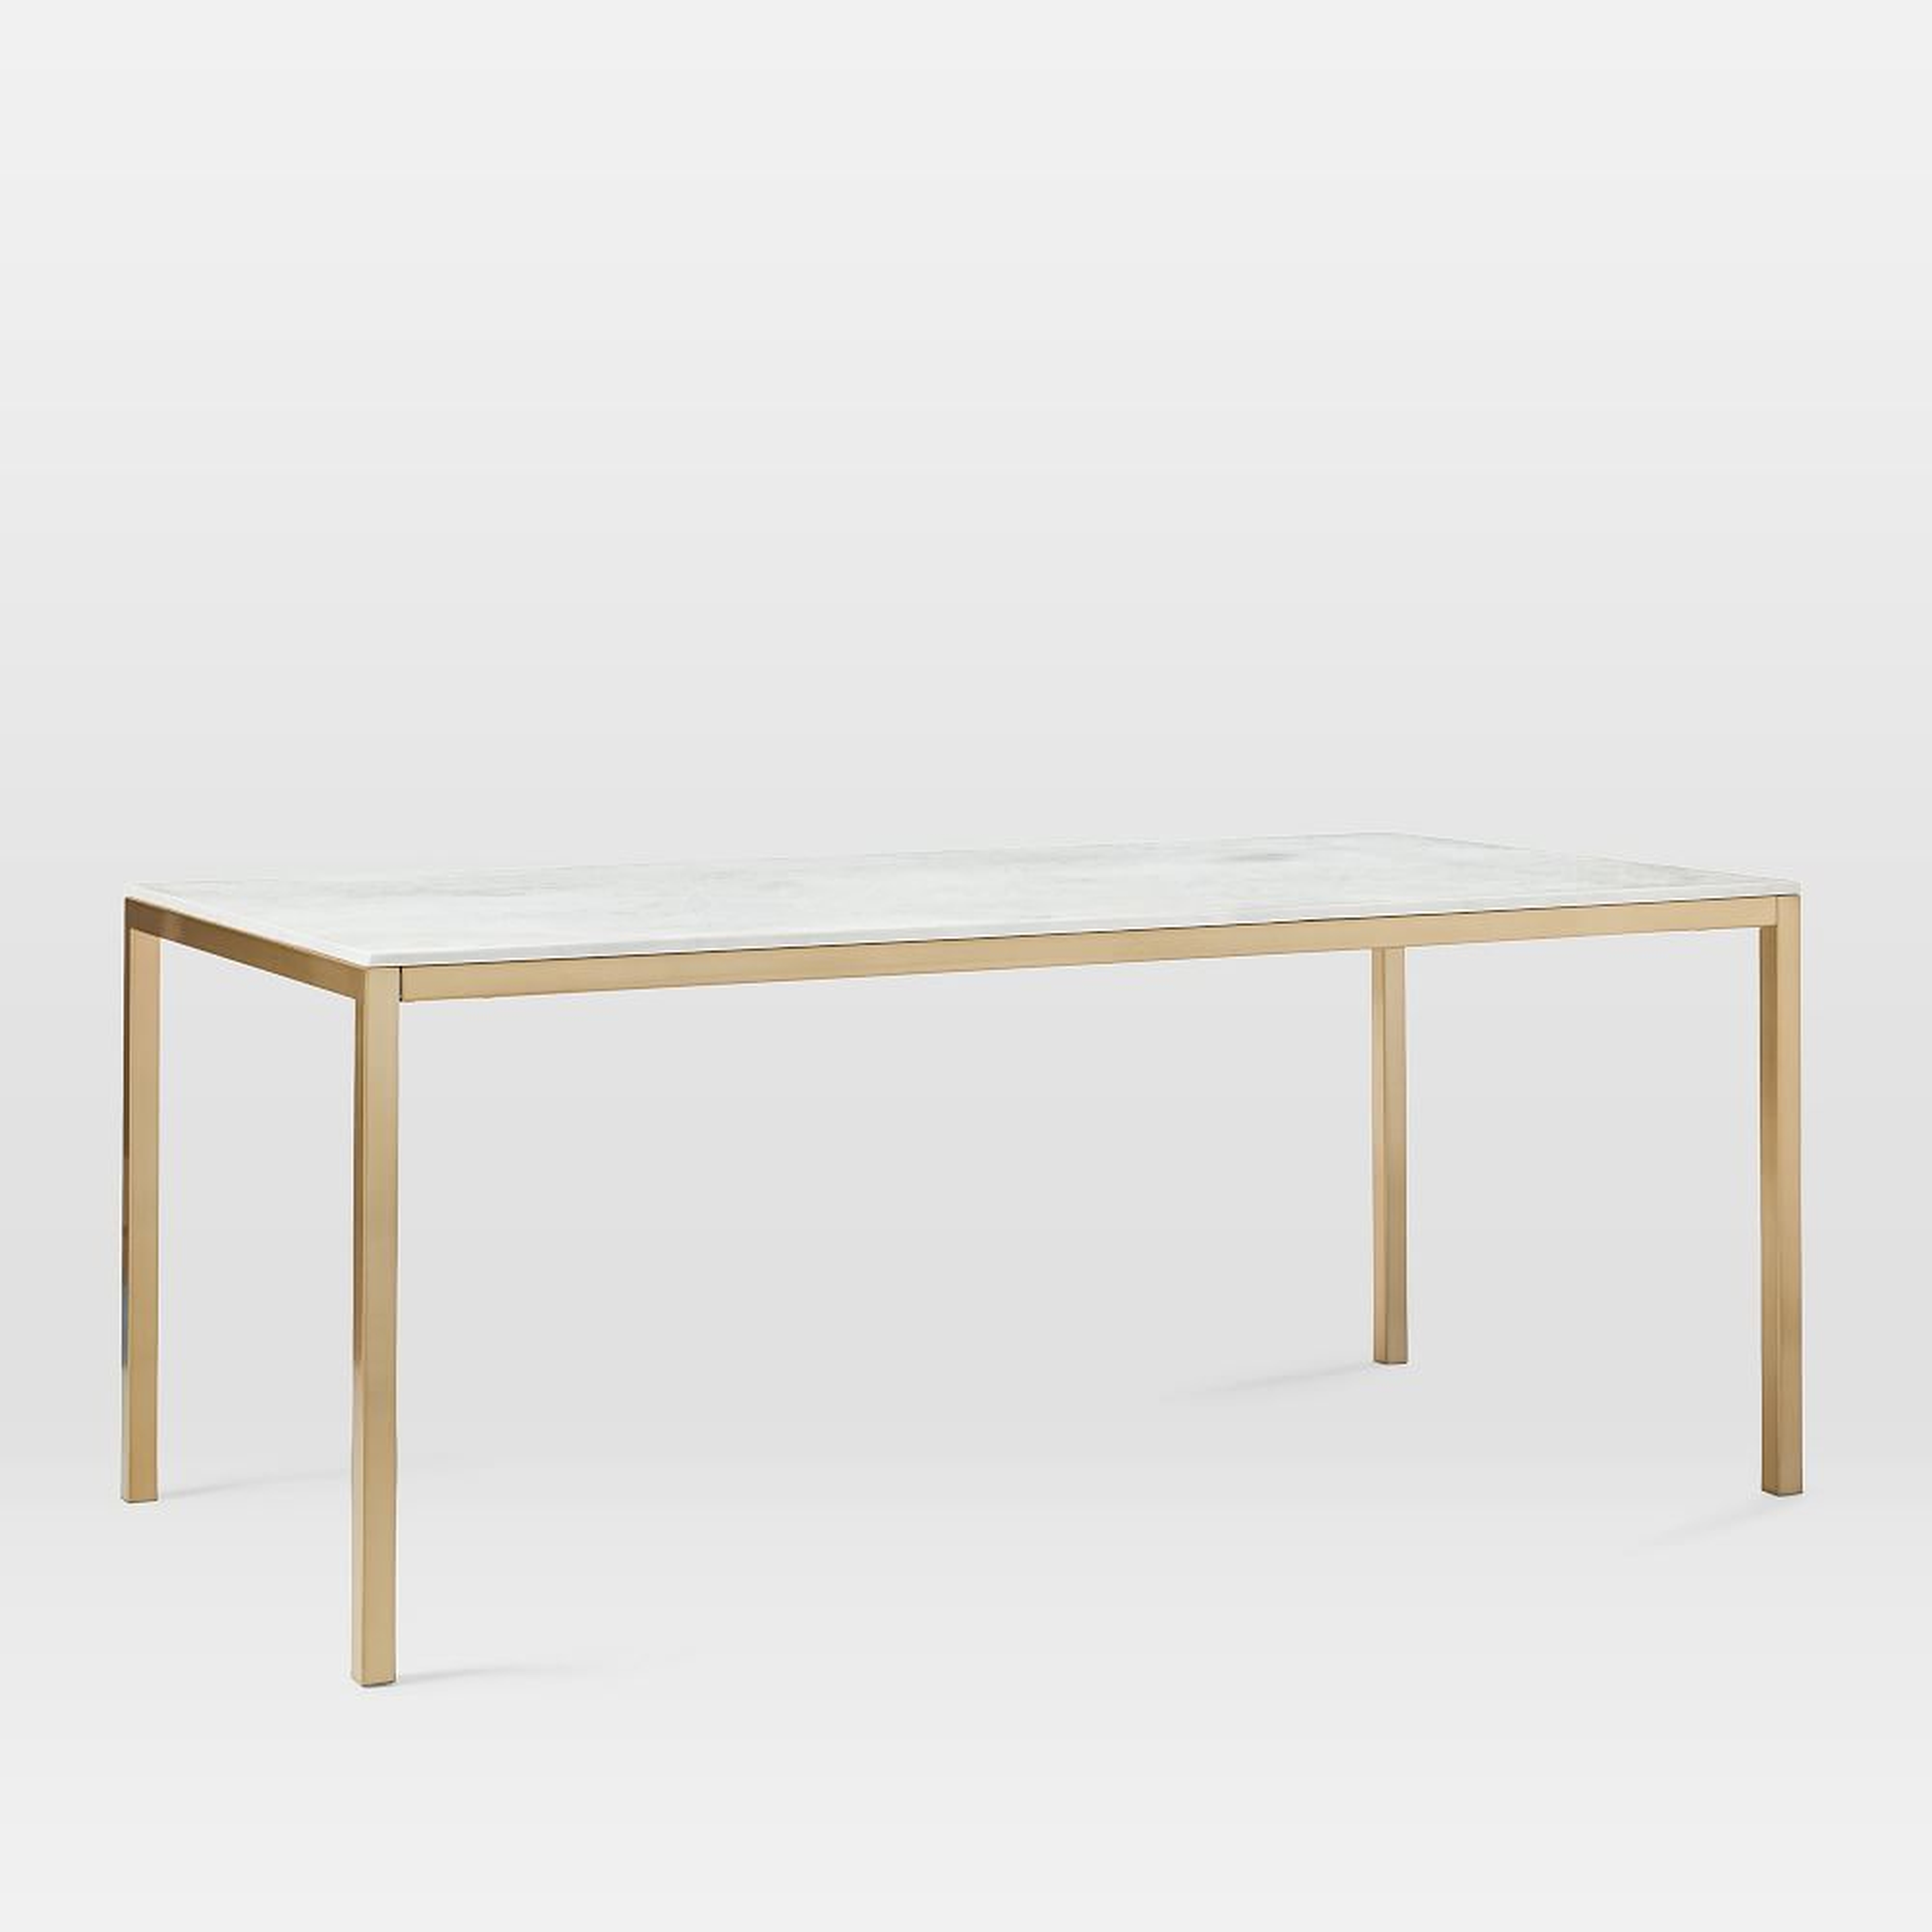 Frame 72" Dining Table, Marble, Antique Brass - West Elm